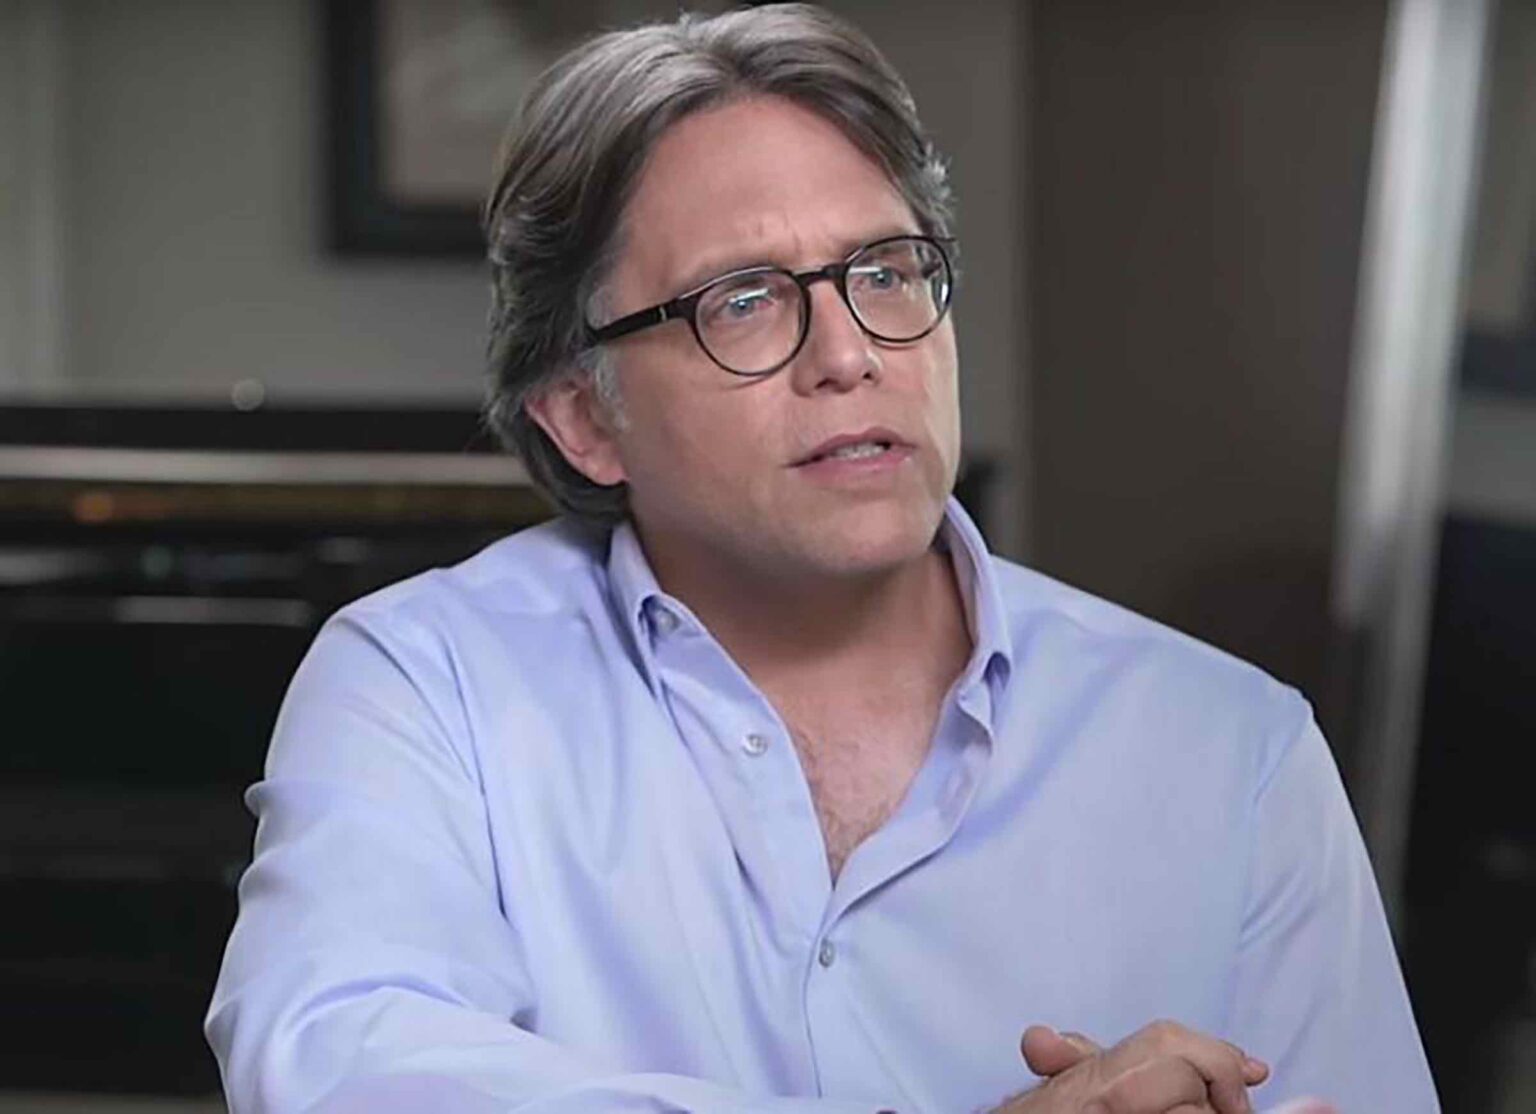 Who's still loyal to NXIVM? Learn who's still loyal to NXIVM leader Keith Raniere as he awaits sentencing later this month.